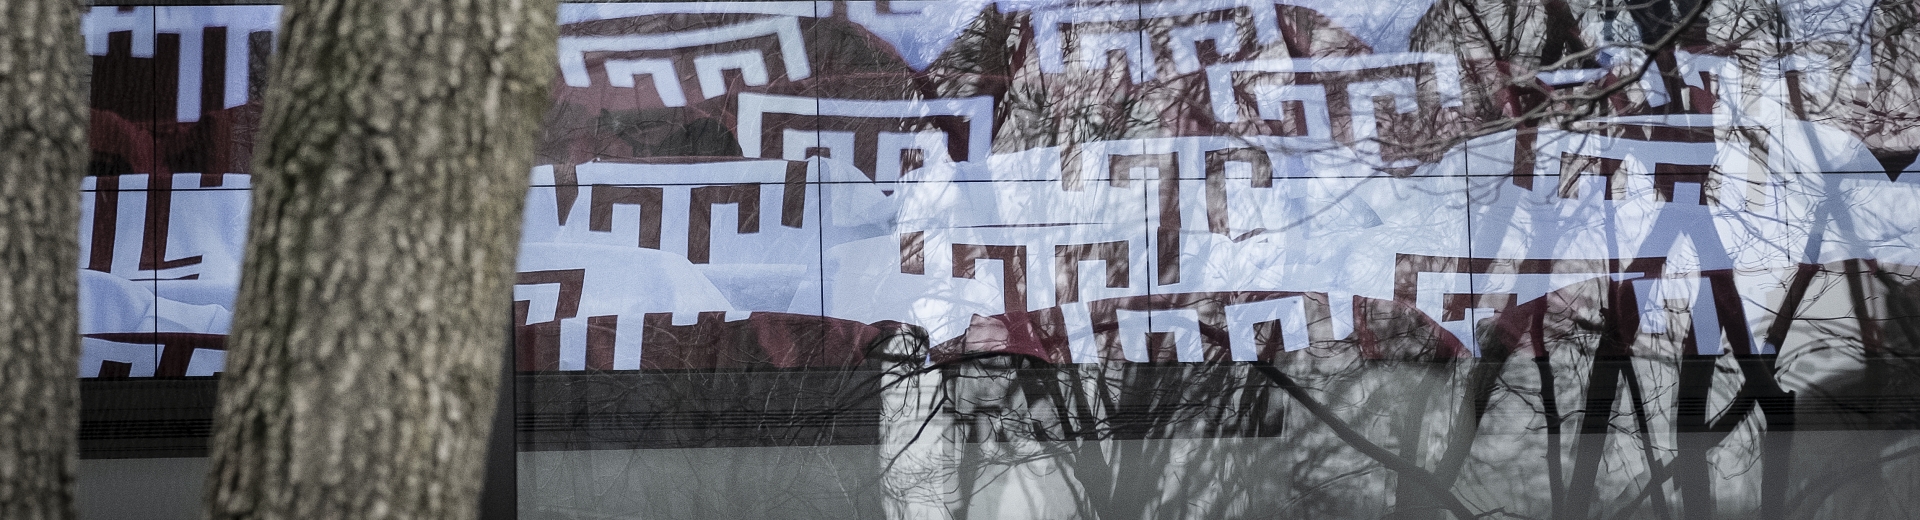 Temple University "T" logos reflected in a window.